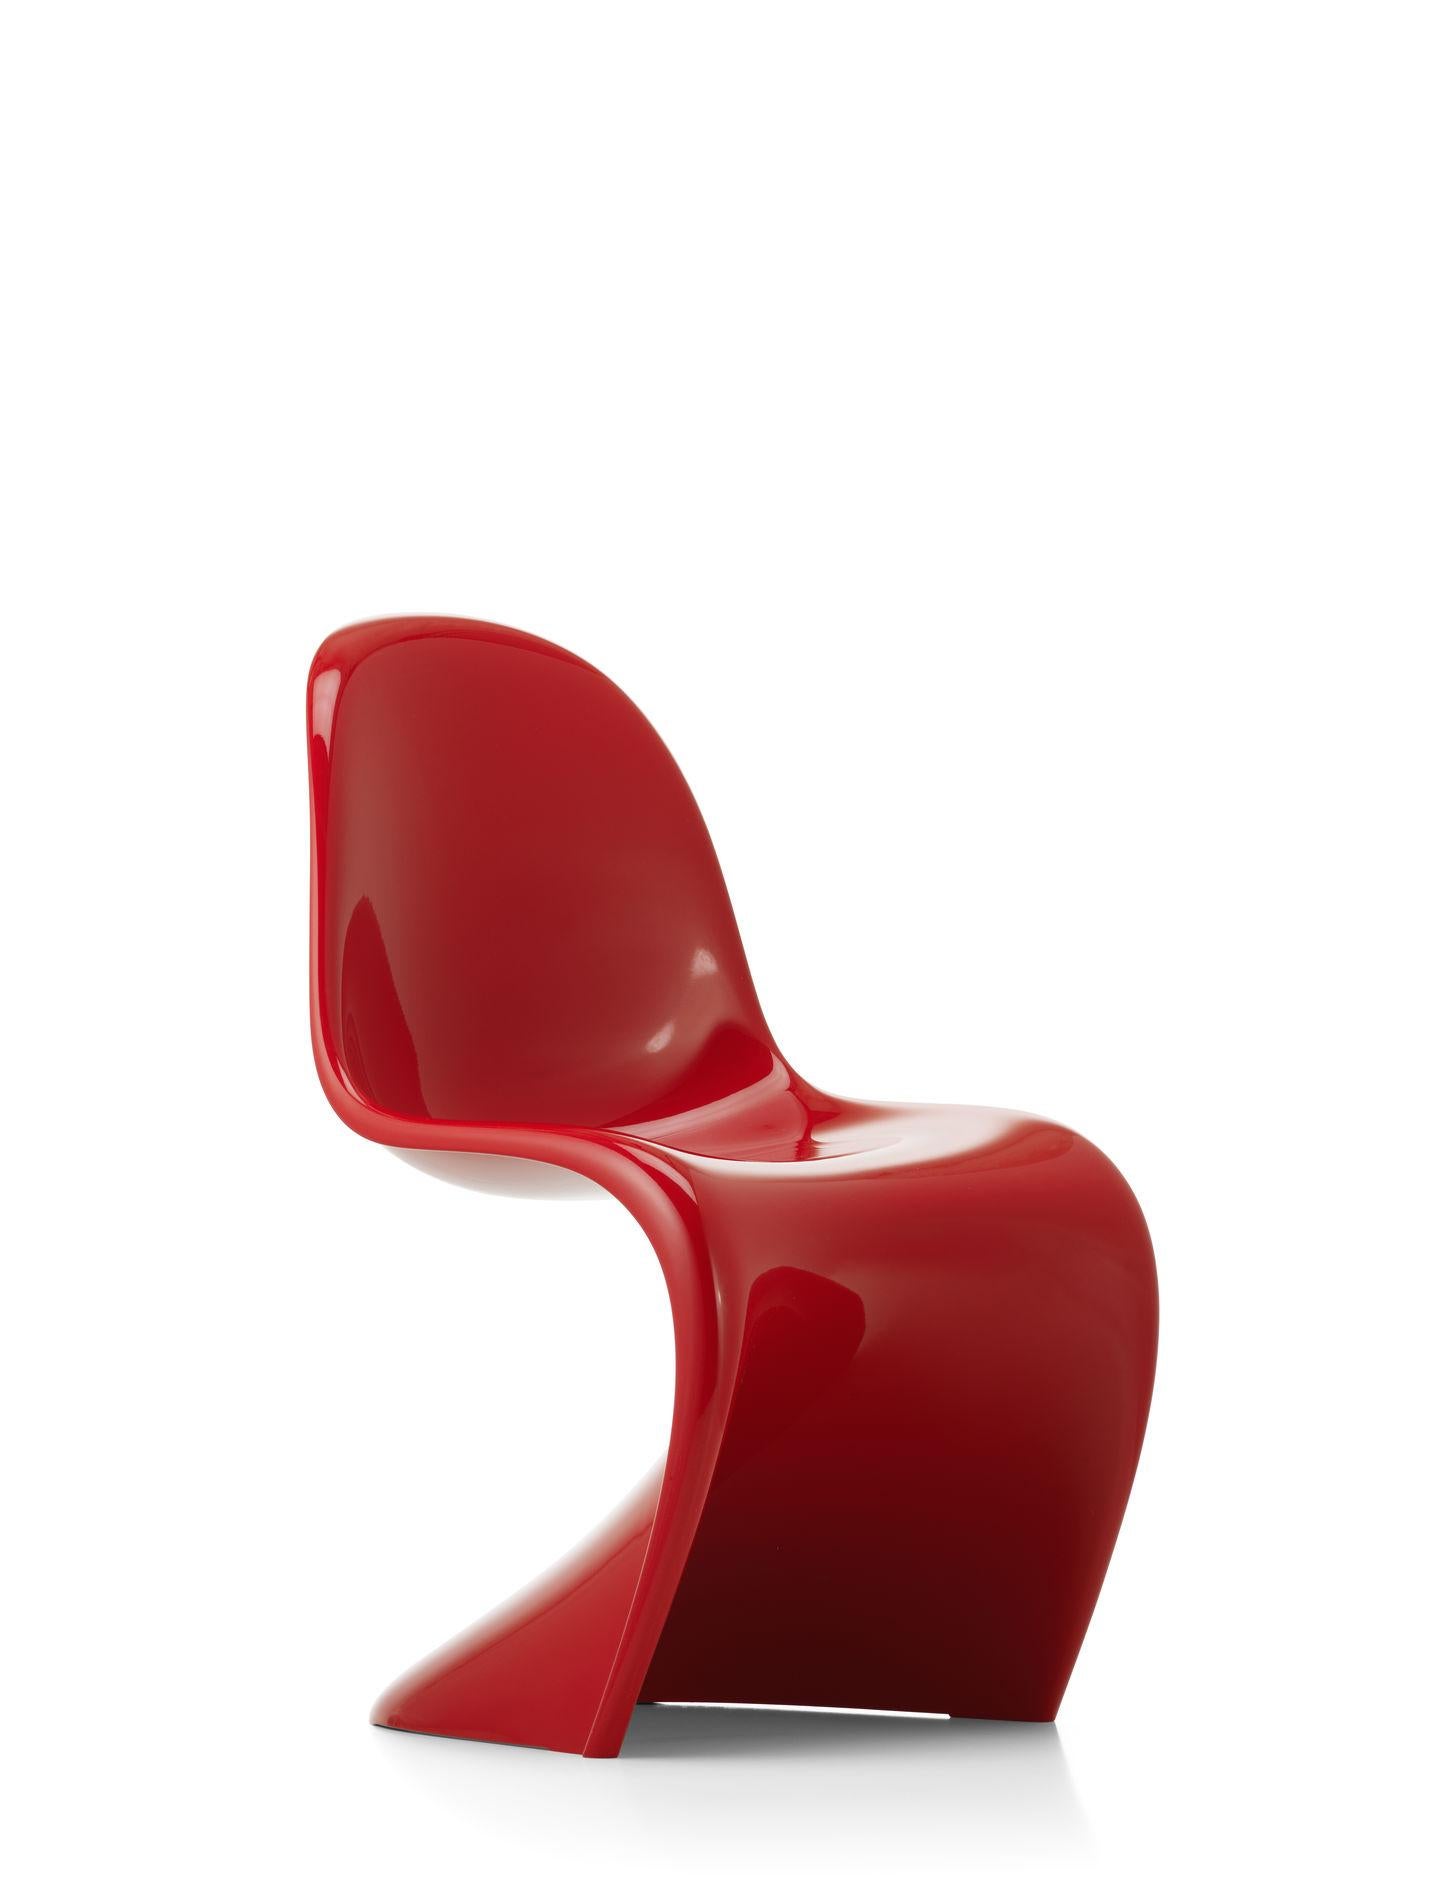 Chair designed by Verner Panton in 1959.
Manufactured by Vitra, Switzerland.

Having conceived a design for an all-plastic chair made from one piece, it took Verner Panton several years to find a manufacturer. He first came into contact with